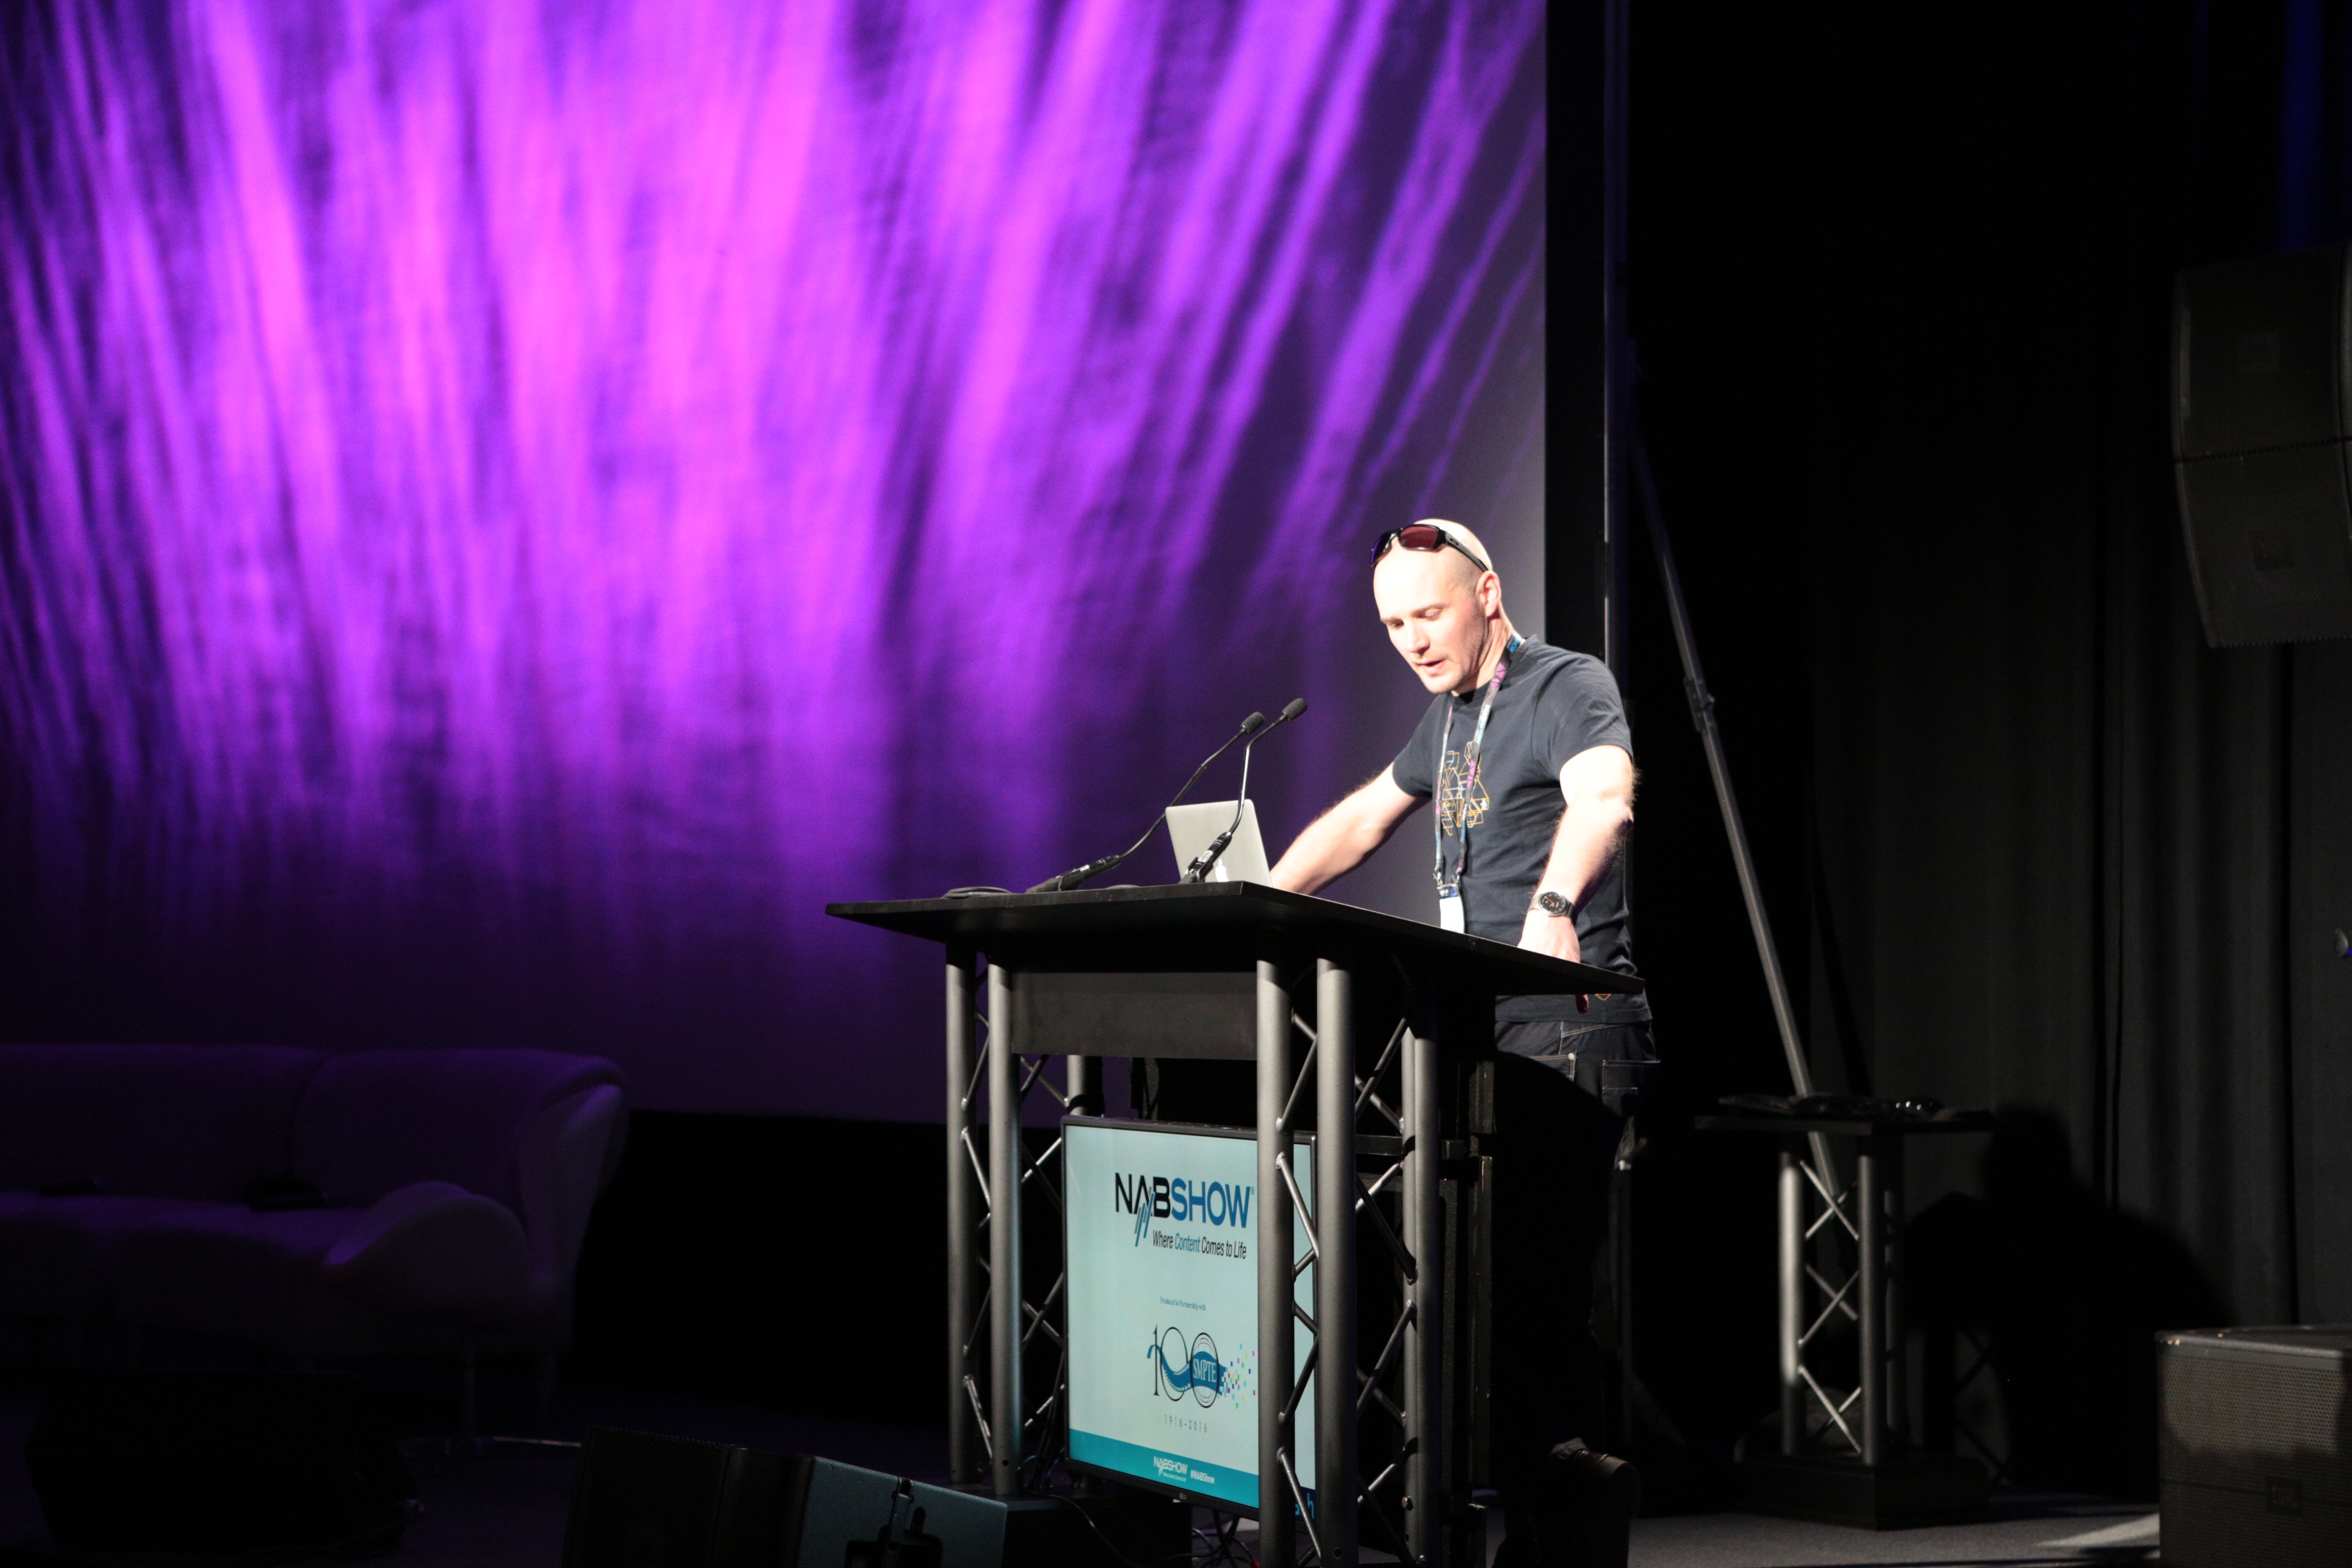 Richard Welsh chairs NAB Show's The Future of Cinema Conference